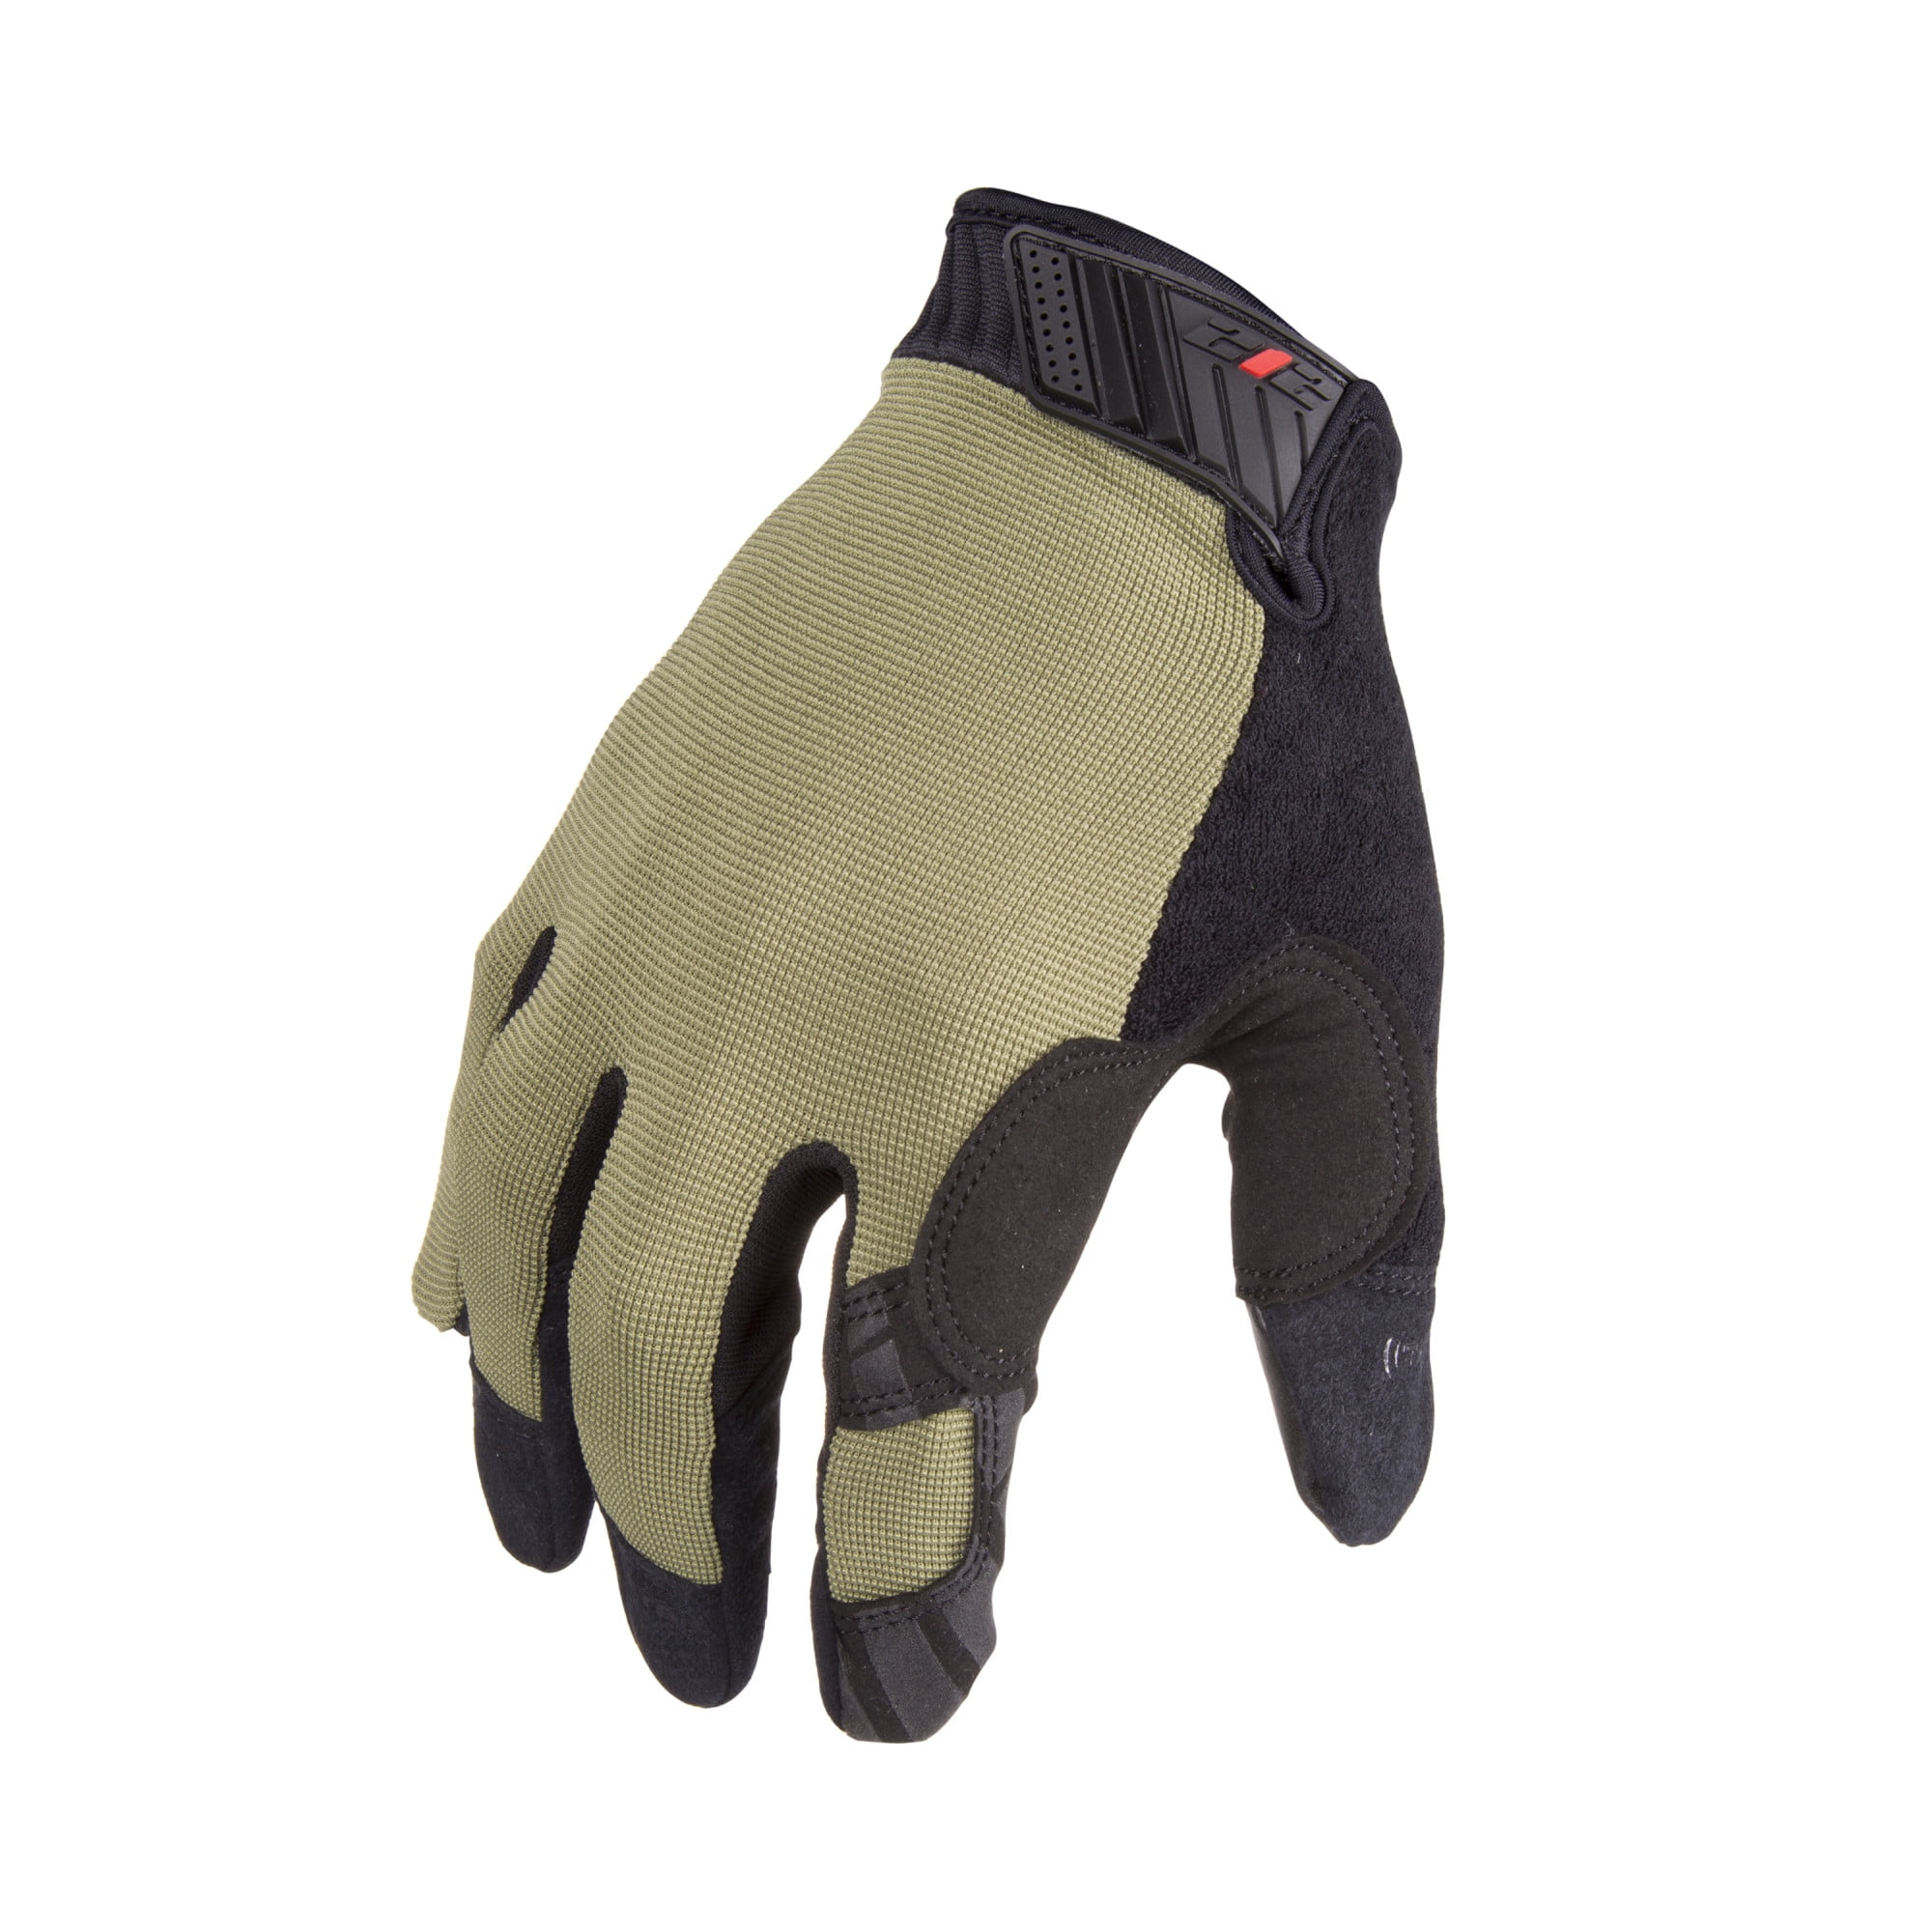 212 Performance Grip Touch Large Foliage MGGC-BL77-010 Touch Screen Work Gloves 